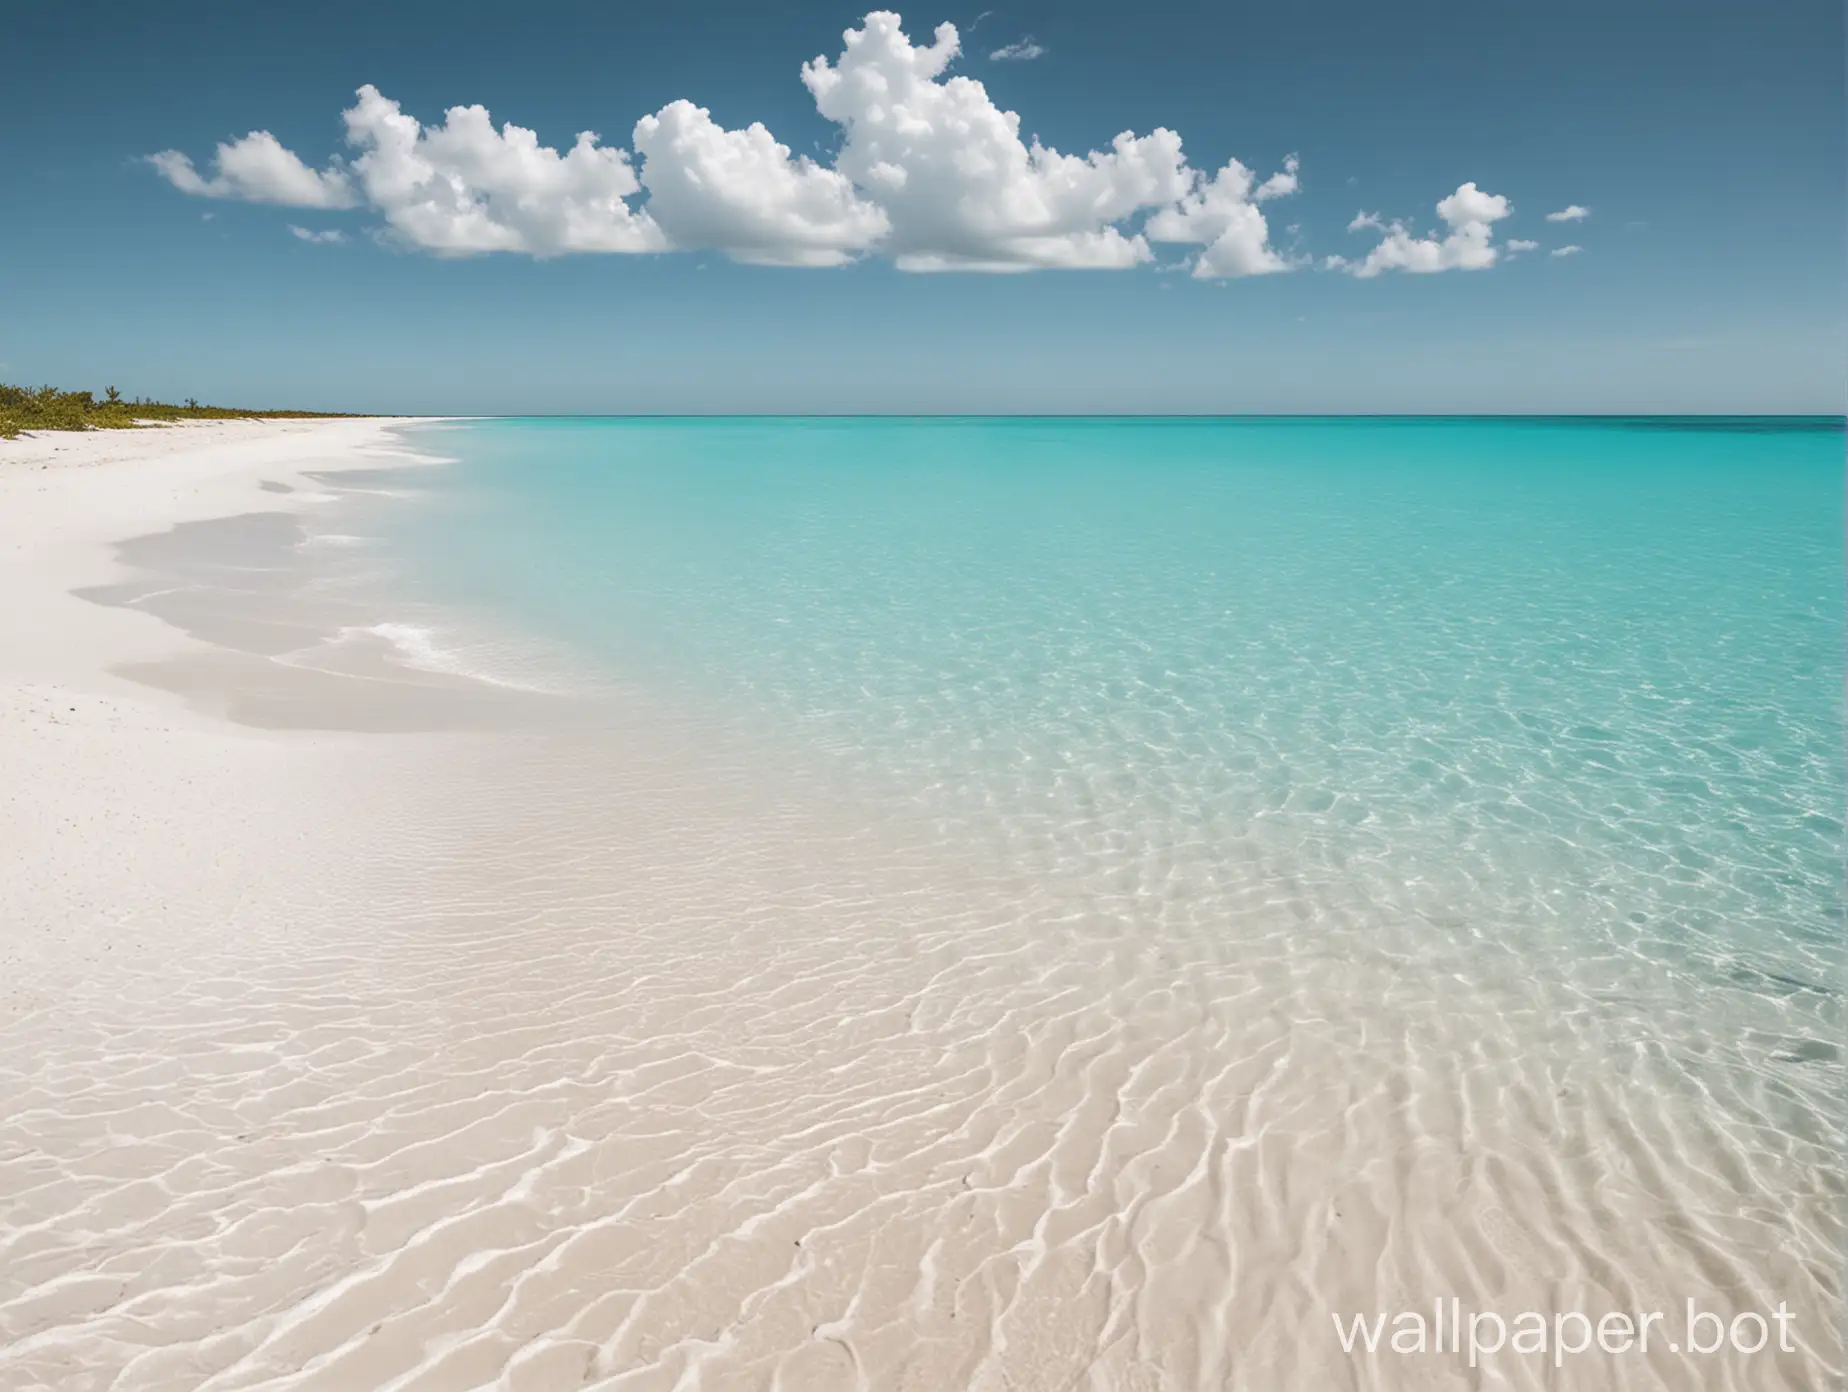 a stunning white wide sandy beach with turquoise calm water and a cloudless blue sunny sky like on Turks and Caicos